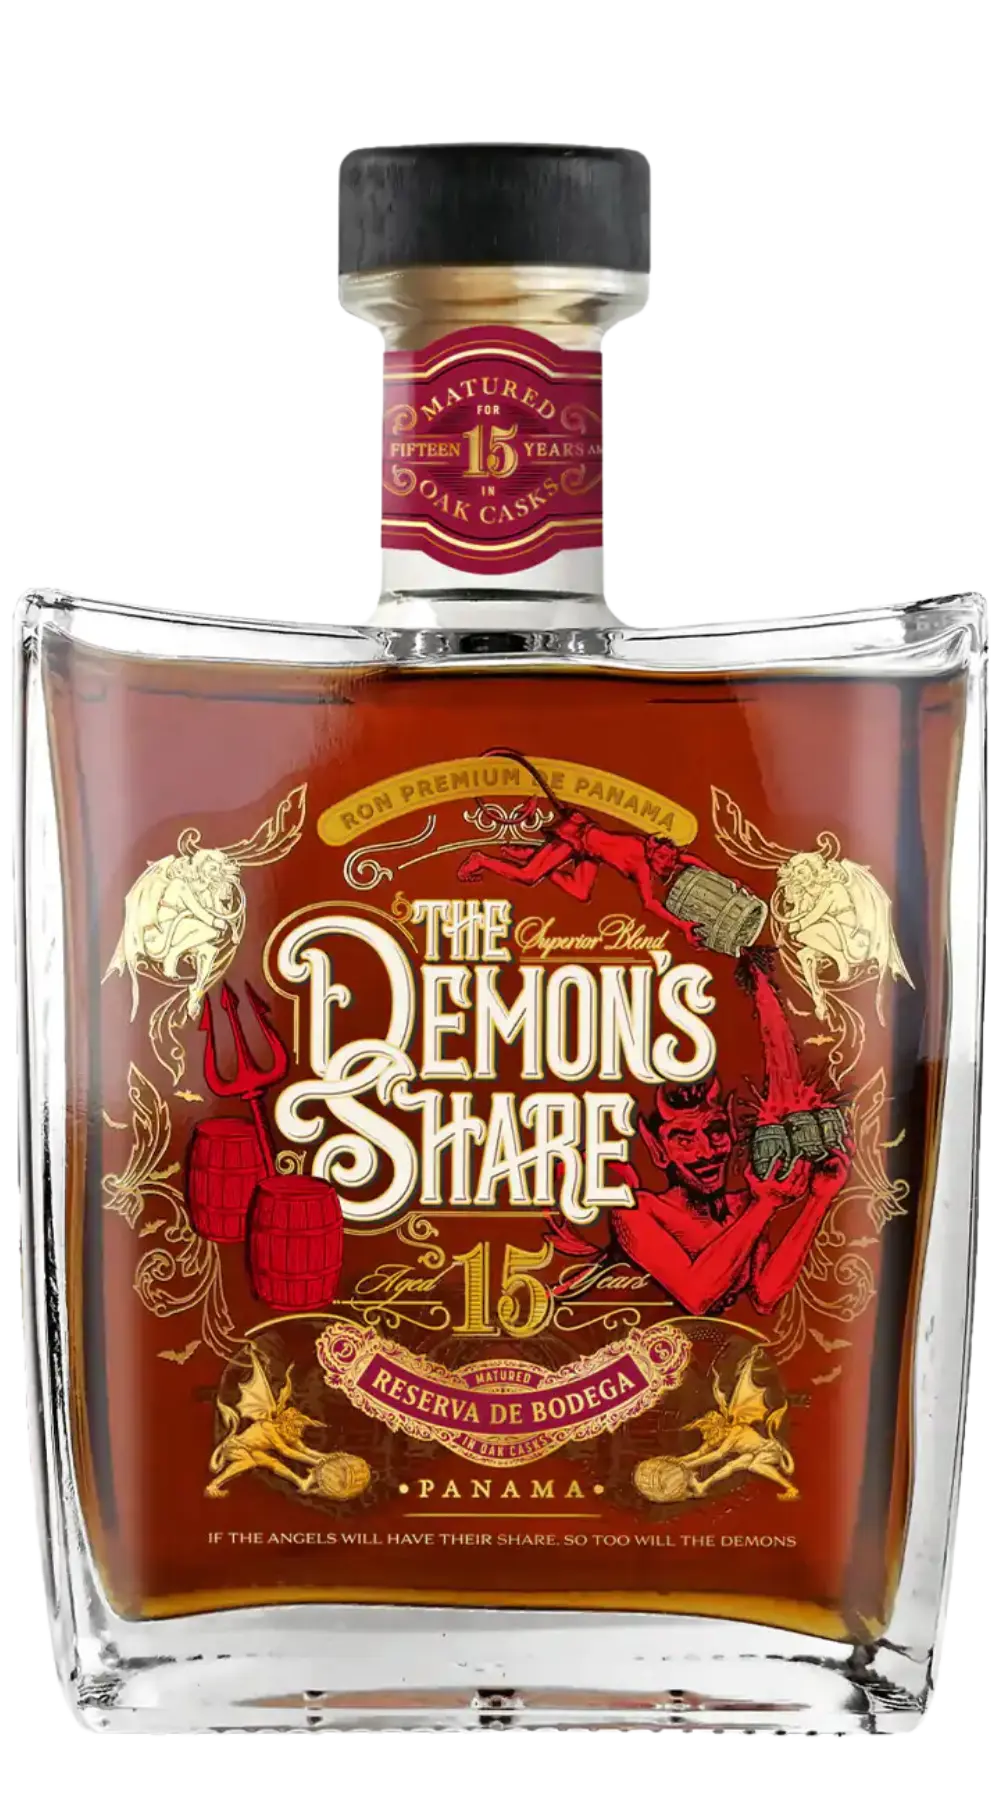 The Demons Share 15 Years old